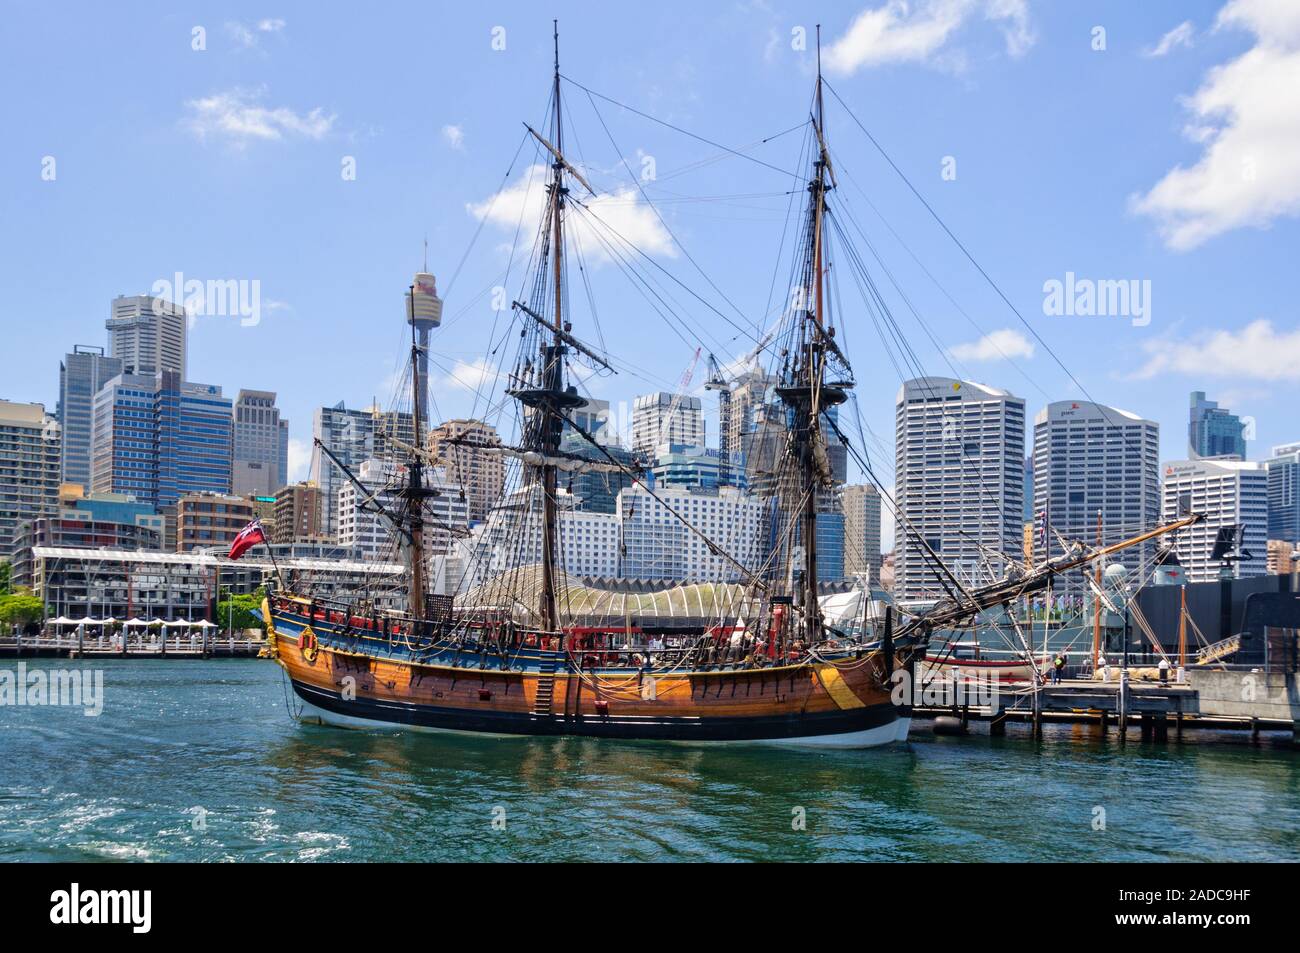 The replica of HMB  Endeavour, the ship that was sailed by Captain James Cook on his first voyage of discovery from 1768 to 1771 - Sydney, NSW, Austra Stock Photo